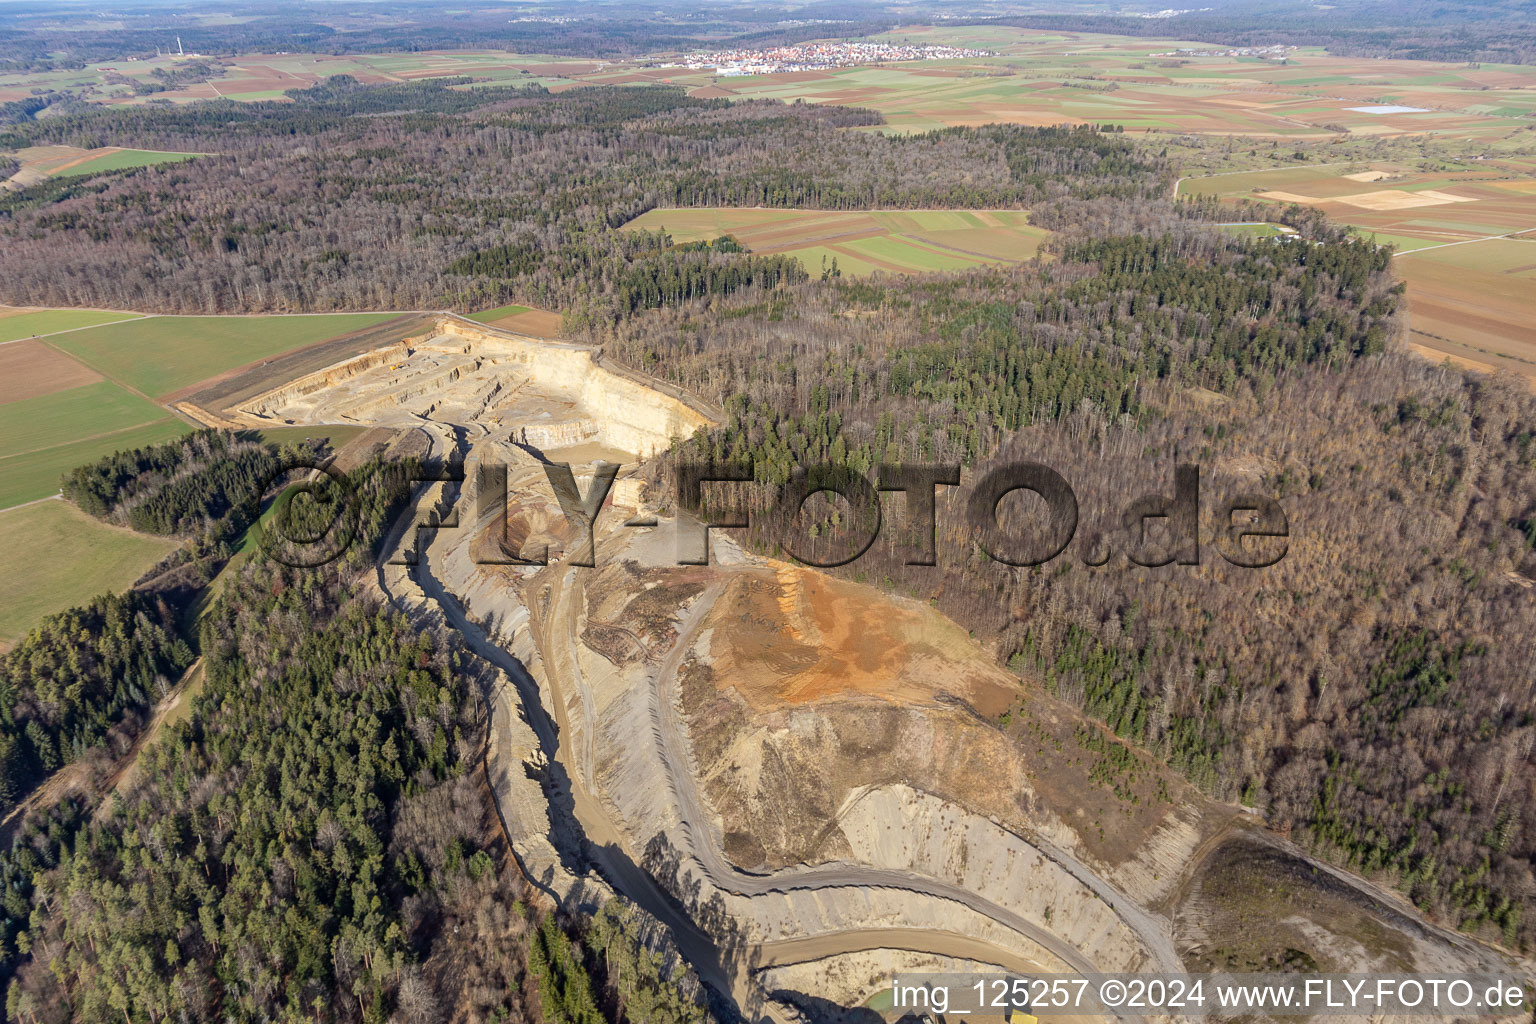 Quarry, Georg Mast gravel works, earth dump in Wildberg in the state Baden-Wuerttemberg, Germany